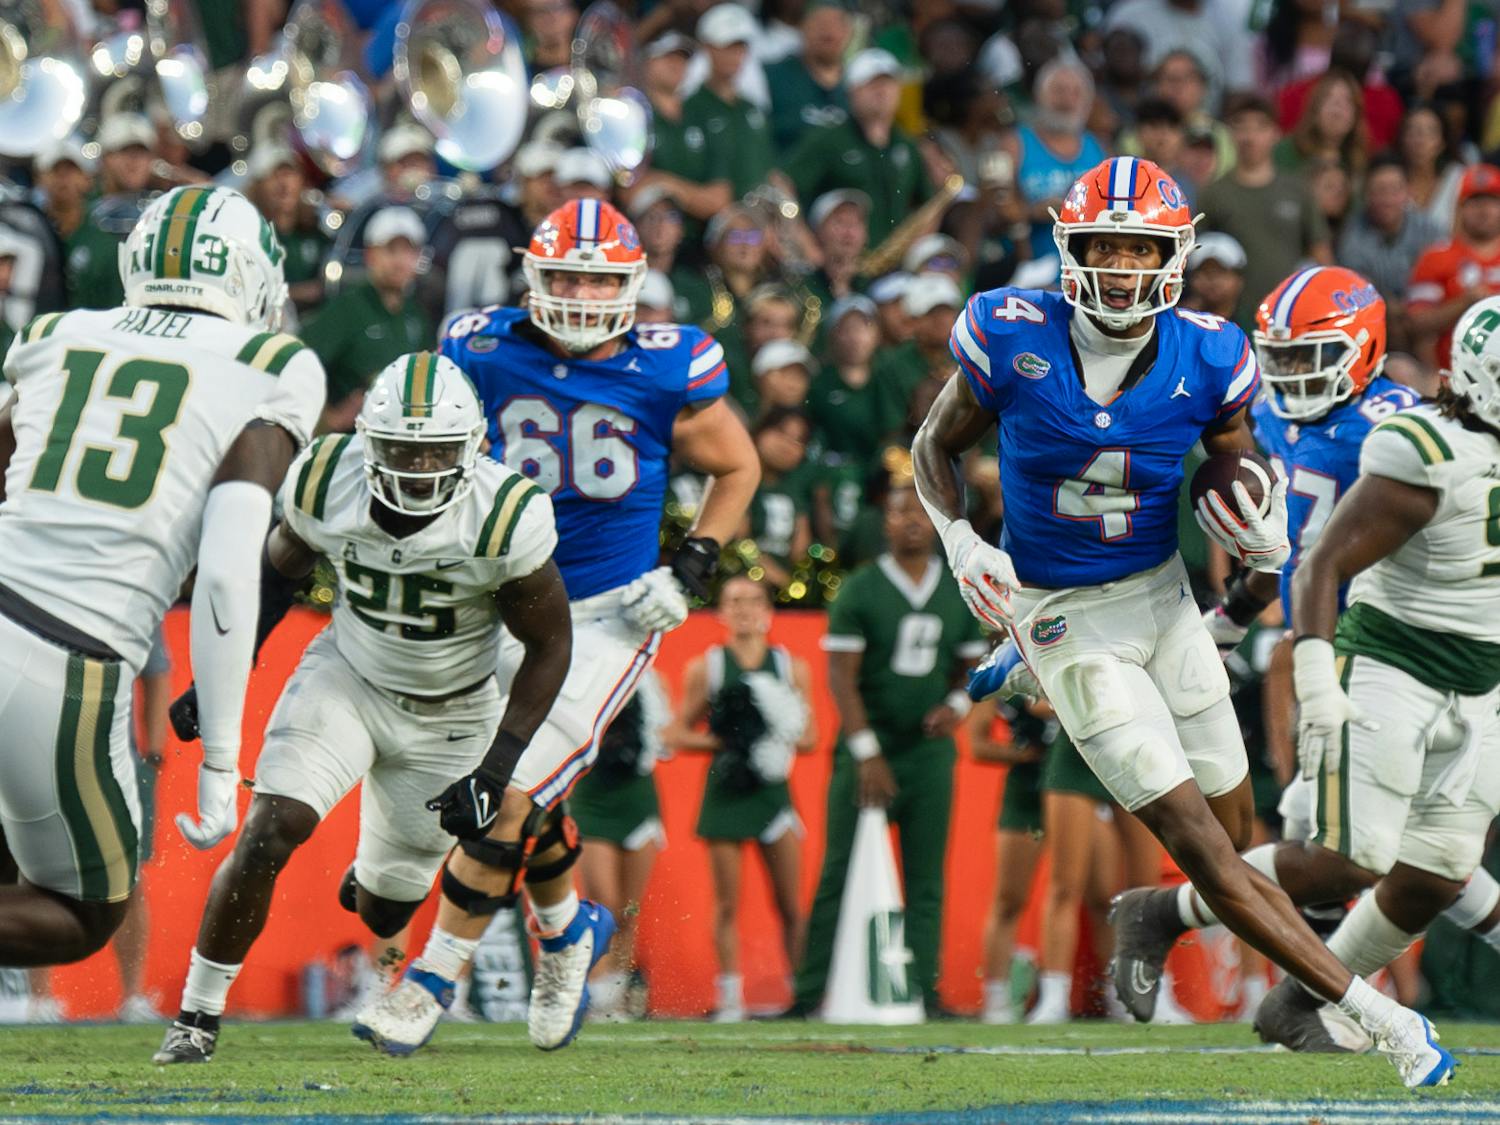 Sophomore wide receiver Caleb Douglas runs with the ball in the Gators' 22-7 win against the Charlotte 49ers on Saturday, Sept. 23, 2023.